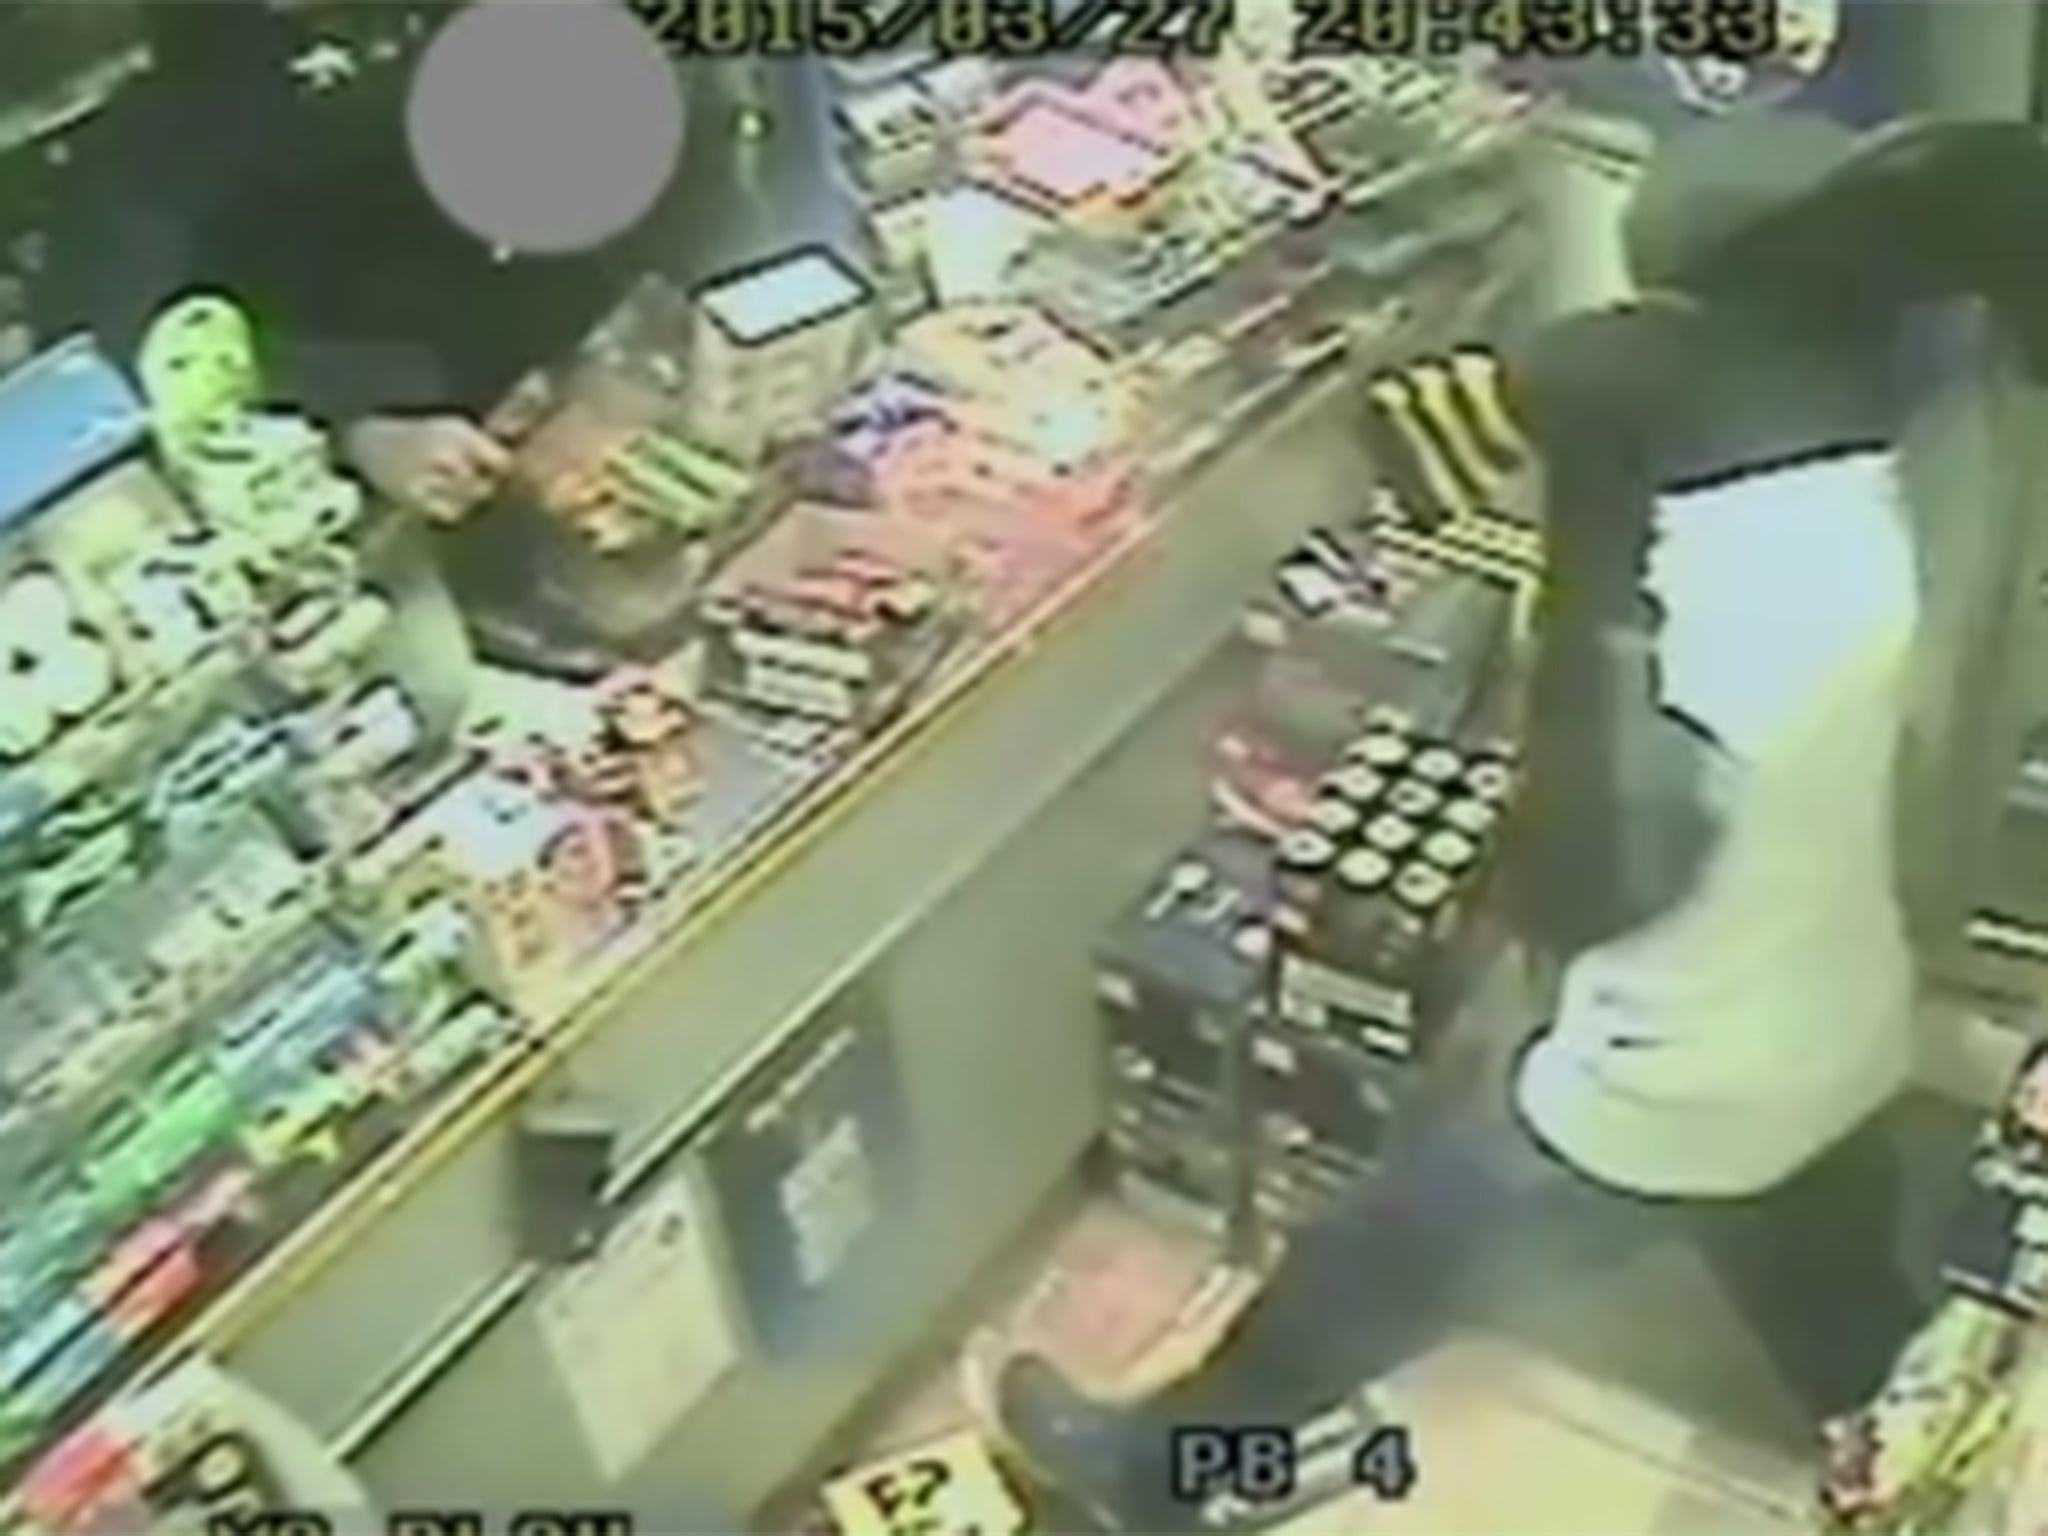 The moment one of the robbers attacks